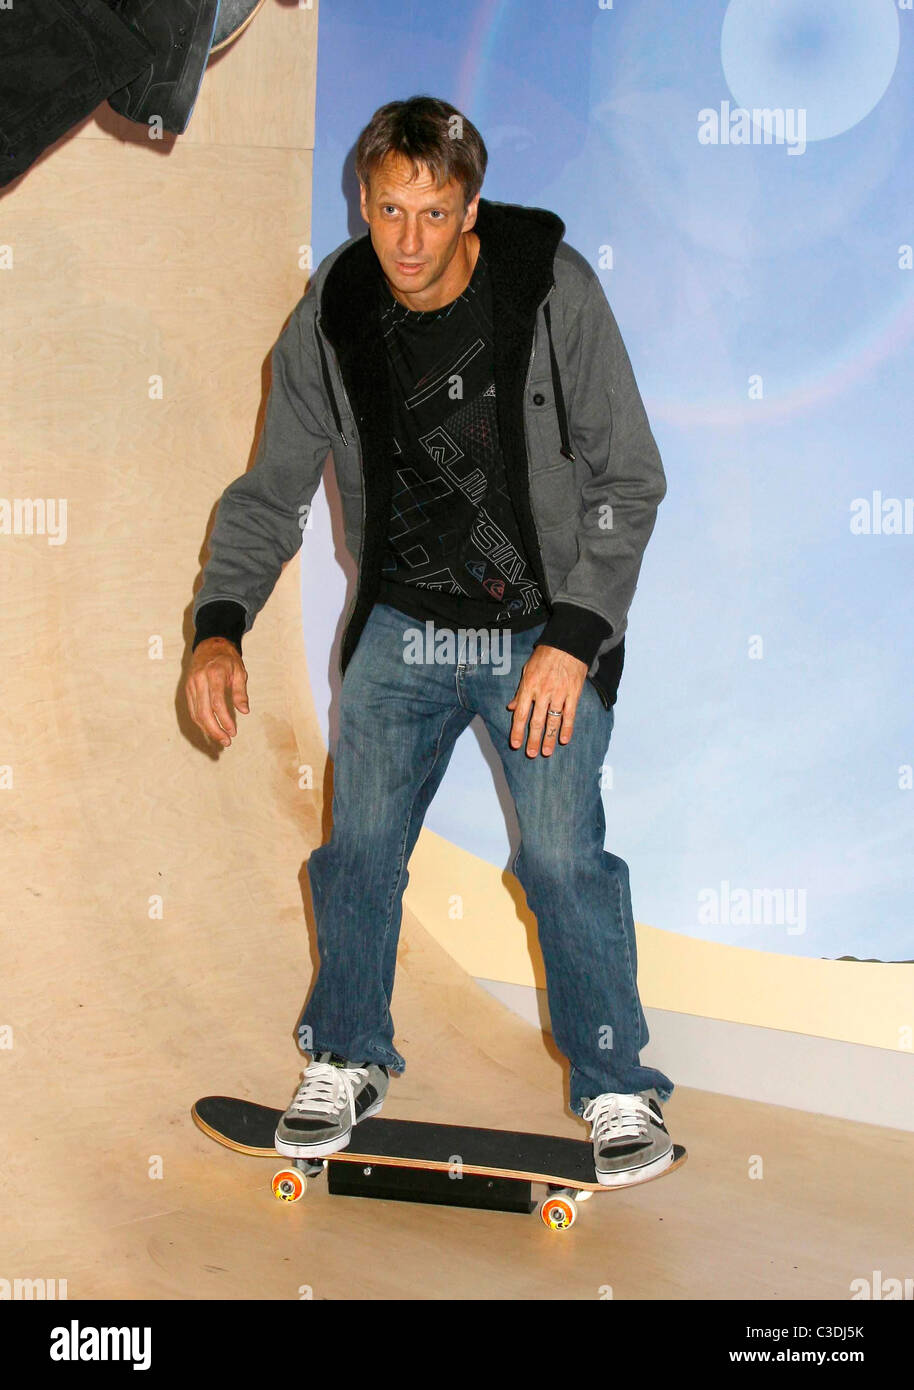 Former professional skateboarder Tony Hawk attends the unveiling of his wax figure at Madame Tussauds Hollywood Los Angeles, Stock Photo